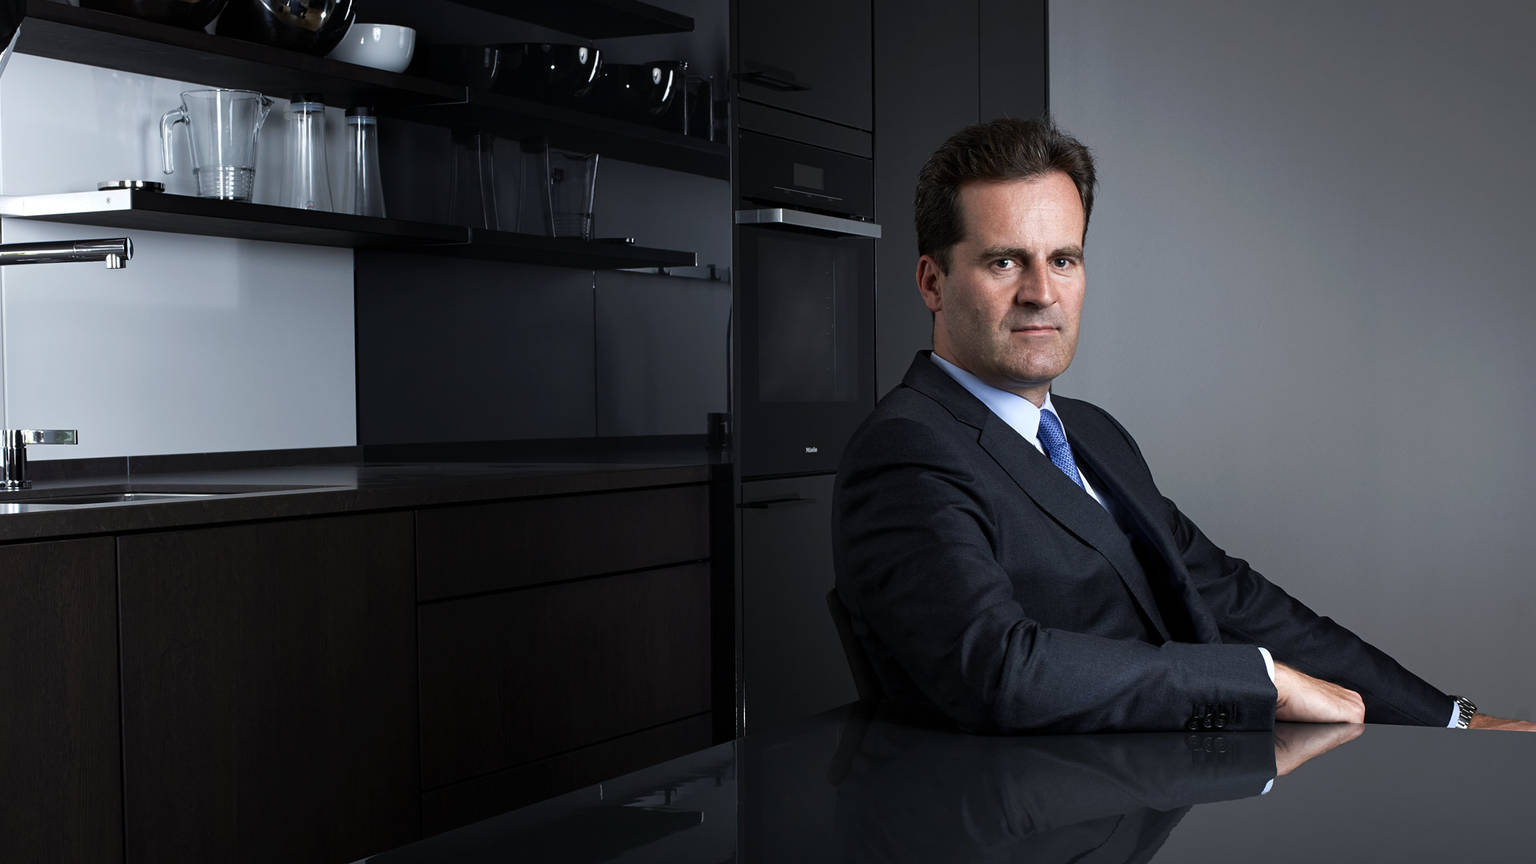 SieMatic family: Ulrich W. Siekmann has been managing the expanding international family business since 1994.